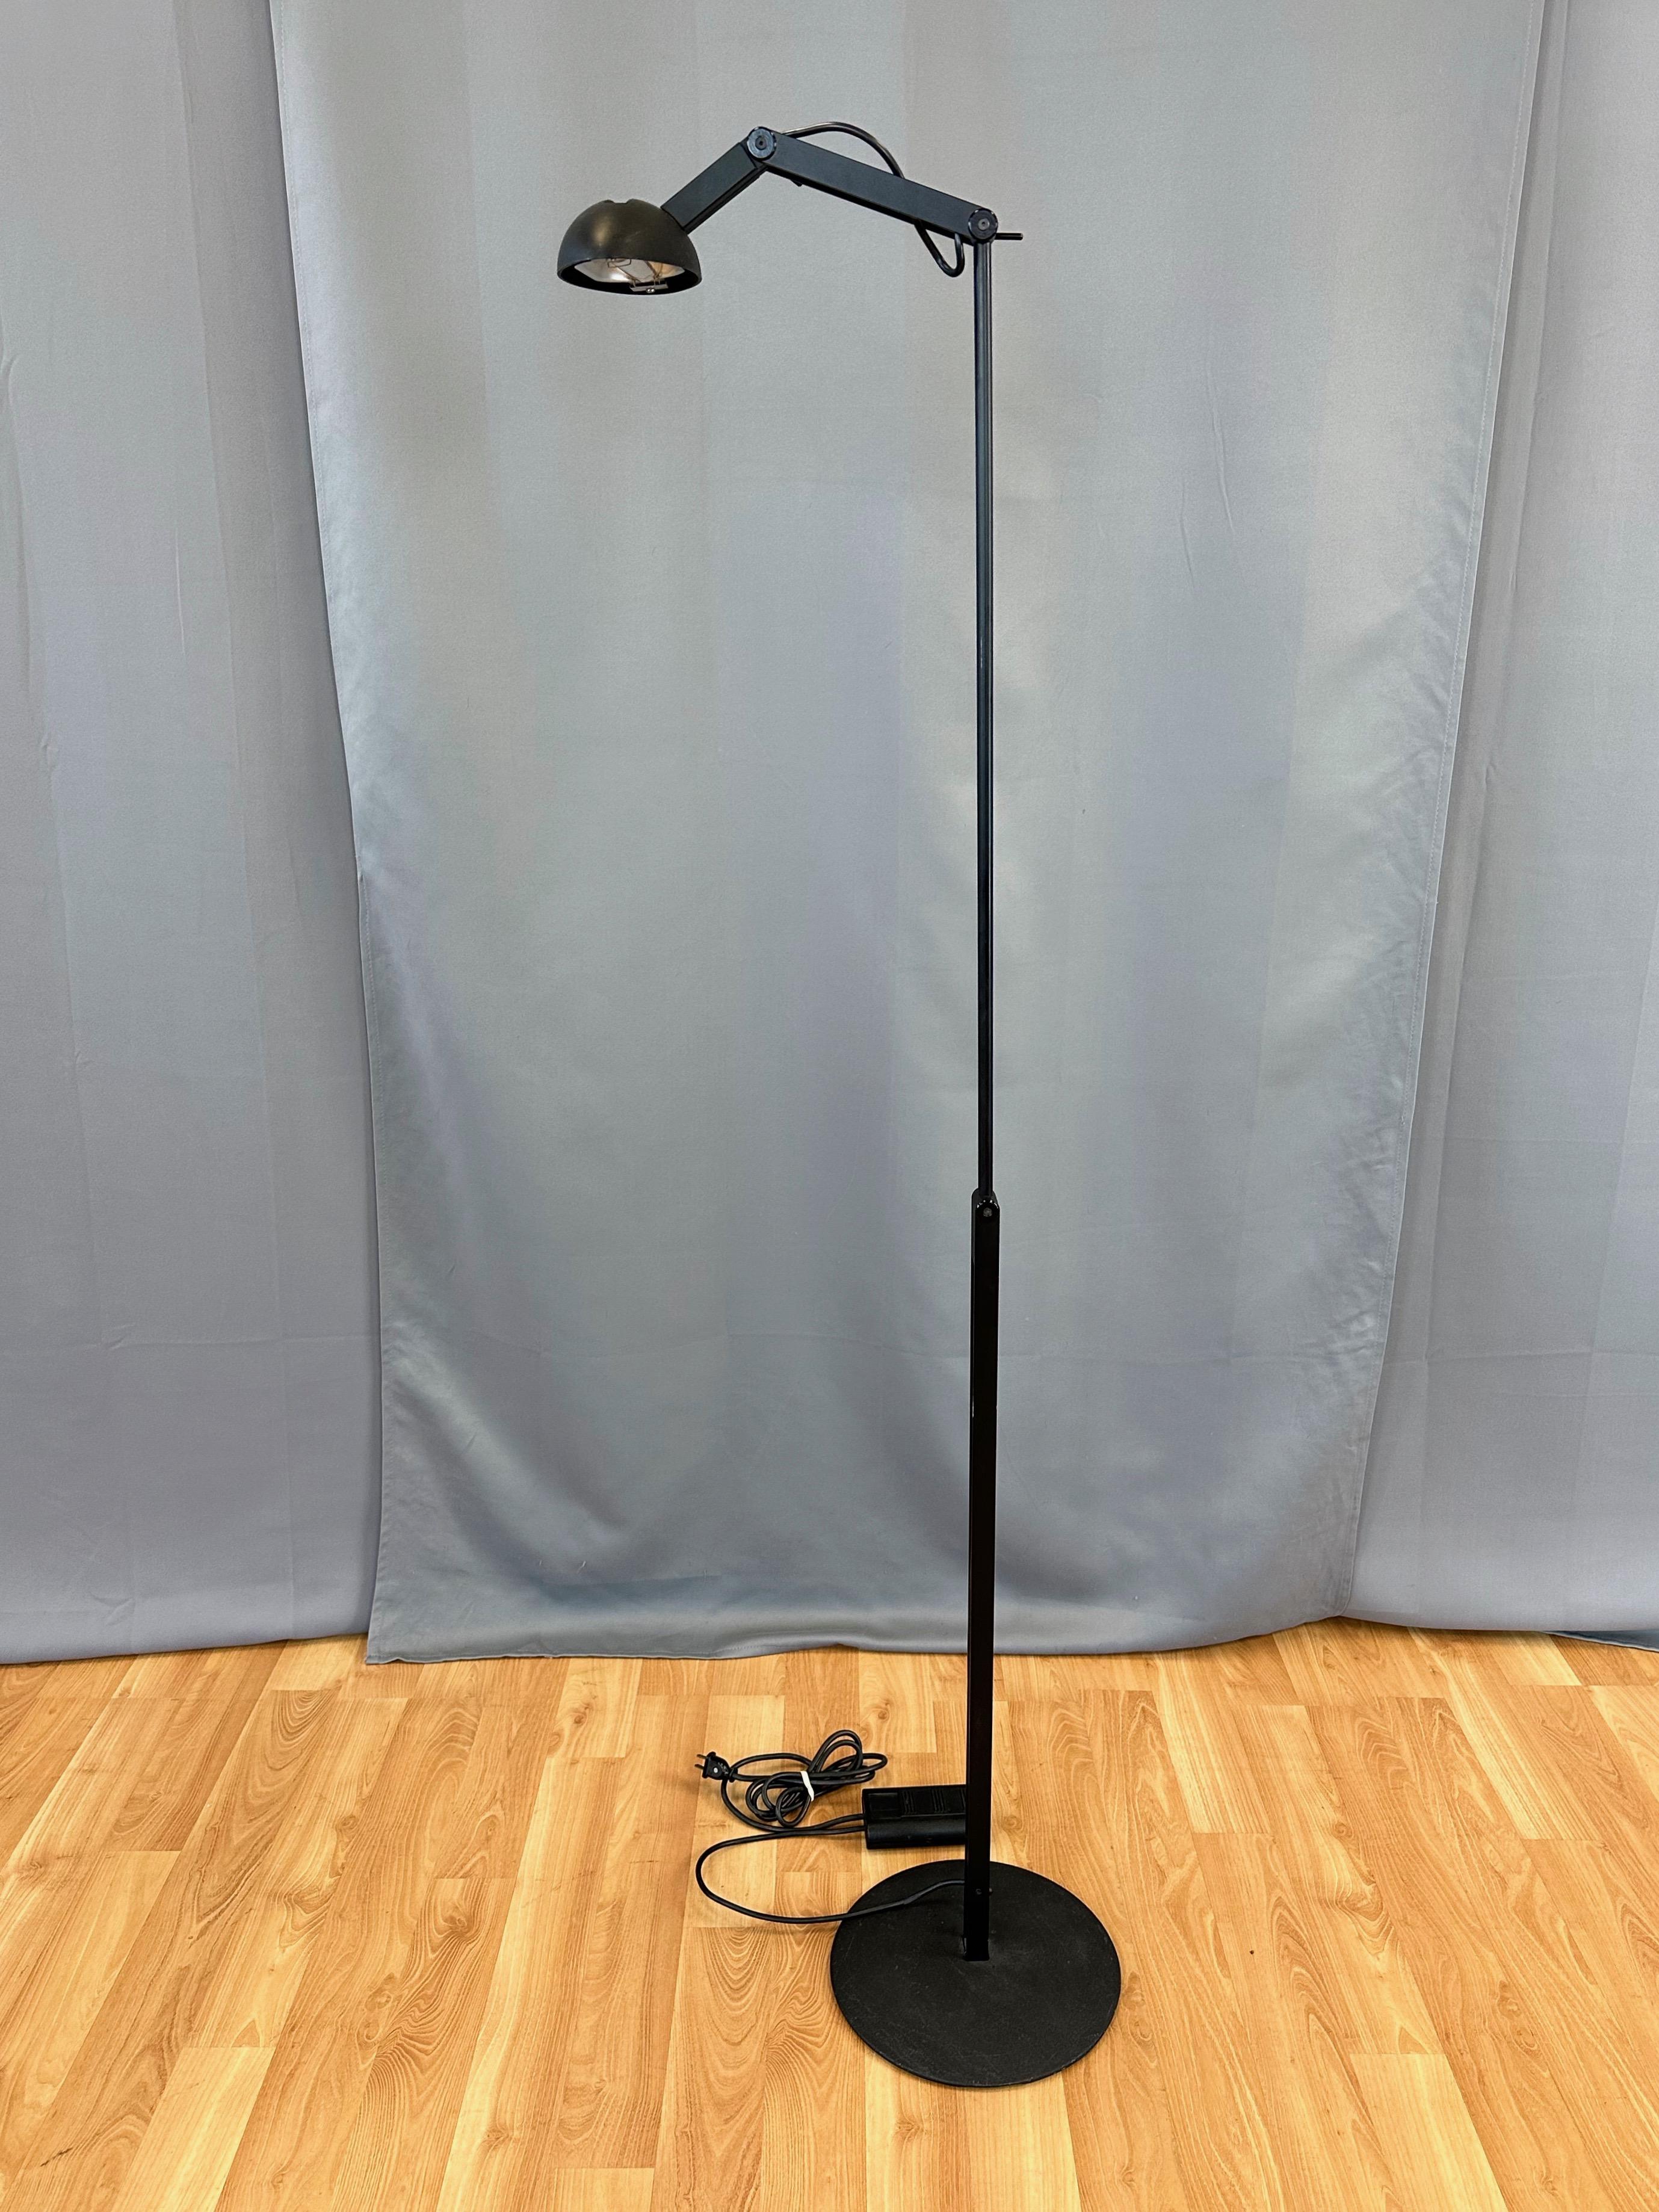 A rather rare 1980s postmodern PAF Studio Gordon floor lamp by Mario Barbaglia and Marco Colombo.

Minimalist positionable metal form with satin black powder coated enamel finish features two points of articulation, with little levers for loosening